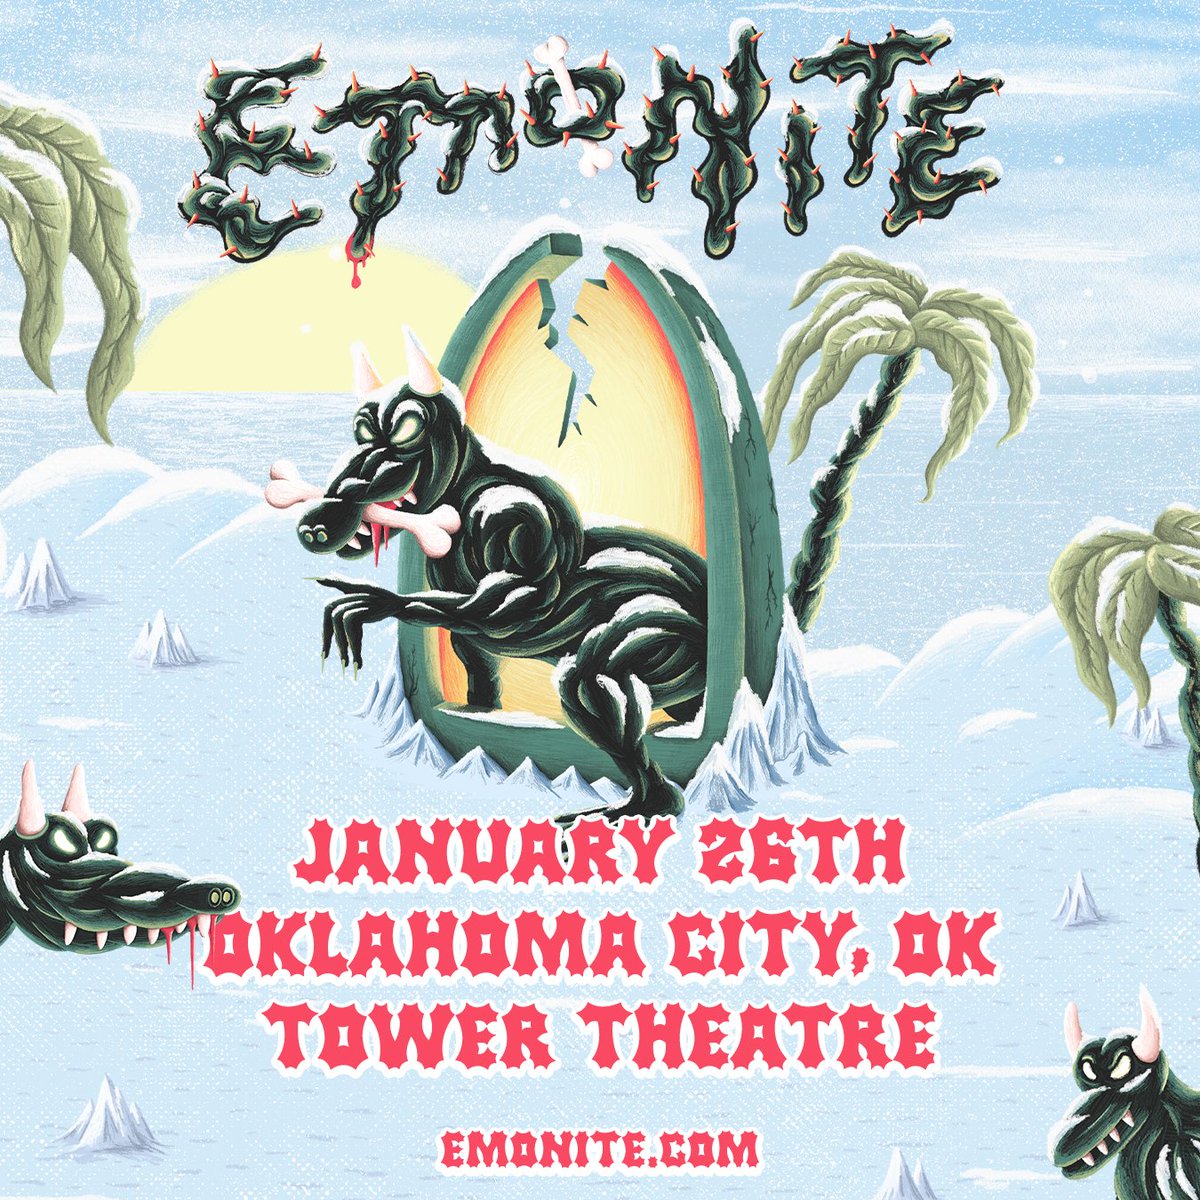 JUST ANNOUNCED! 🖤🤘 Come party to all your favorites from Fall Out Boy, MCR, Taking Back Sunday, Paramore, & so many others. @EmoNite returns - January 26! Tickets go on-sale Friday, but keep an eye out for our Thursday pre-sale for early access. ⚡️ 🎟 towertheatreokc.com